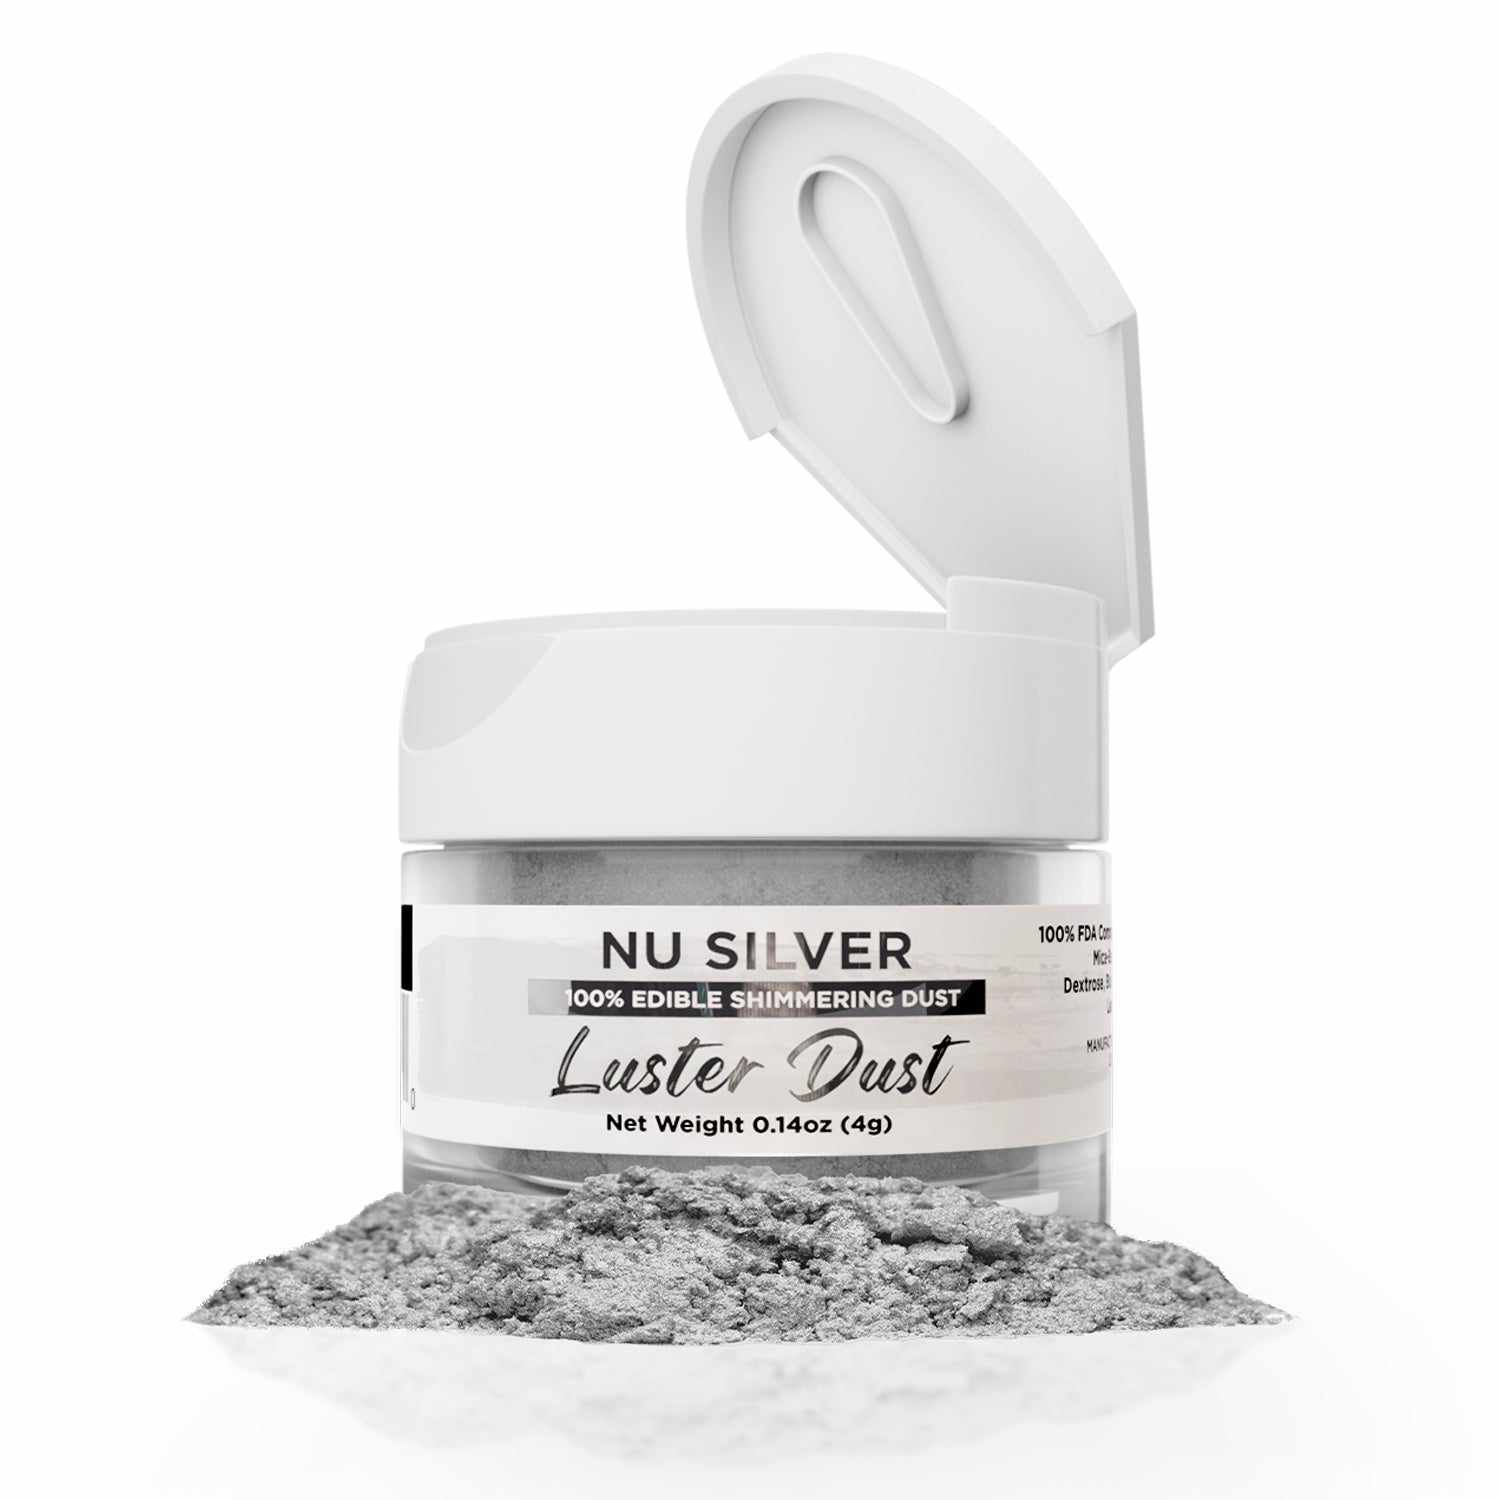 Nu Super Silver Luster Dust Edible | Bakell-Luster Dusts-bakell